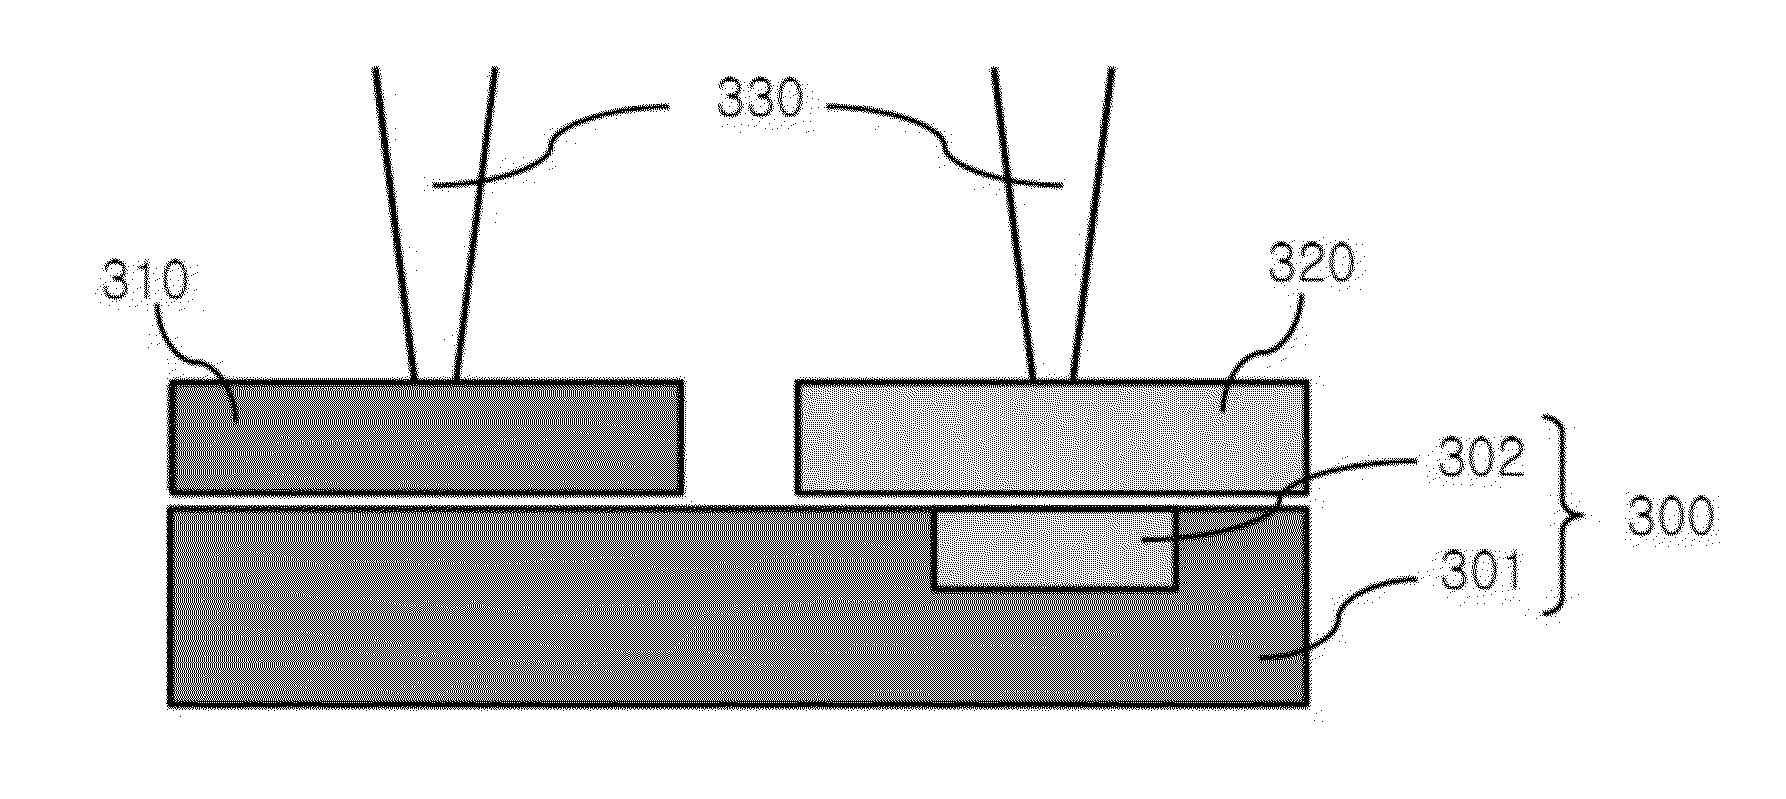 Battery module comprising connecting member composed of dissimilar metals